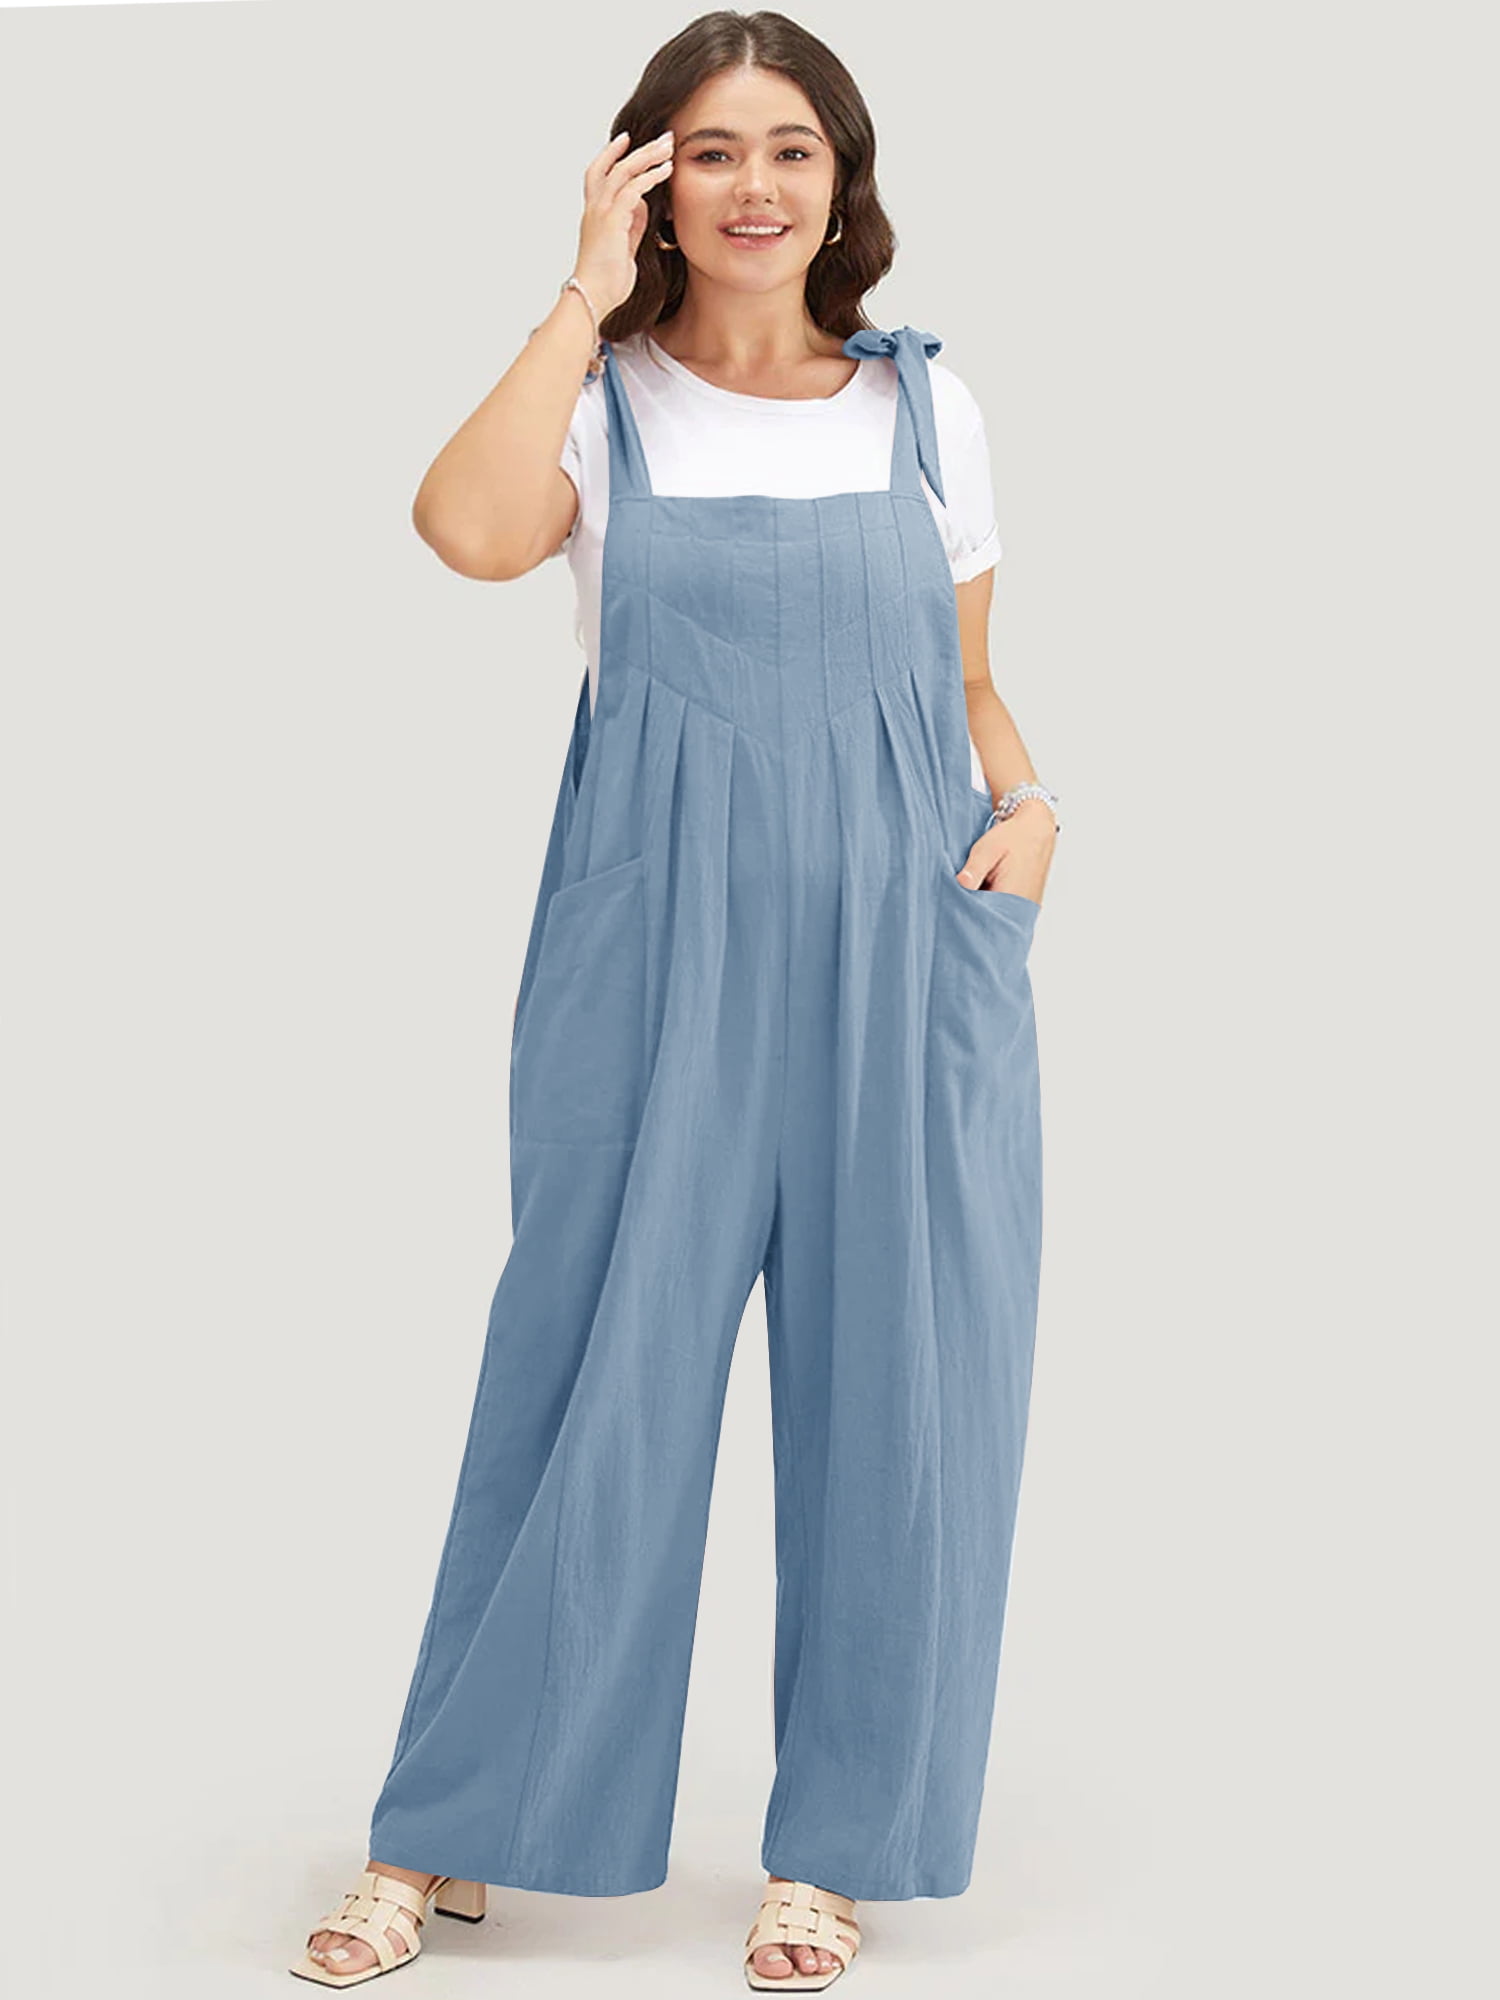 Women's Plus Size Jumpsuits Sleeveless Loose Linen Overalls Knotted ...